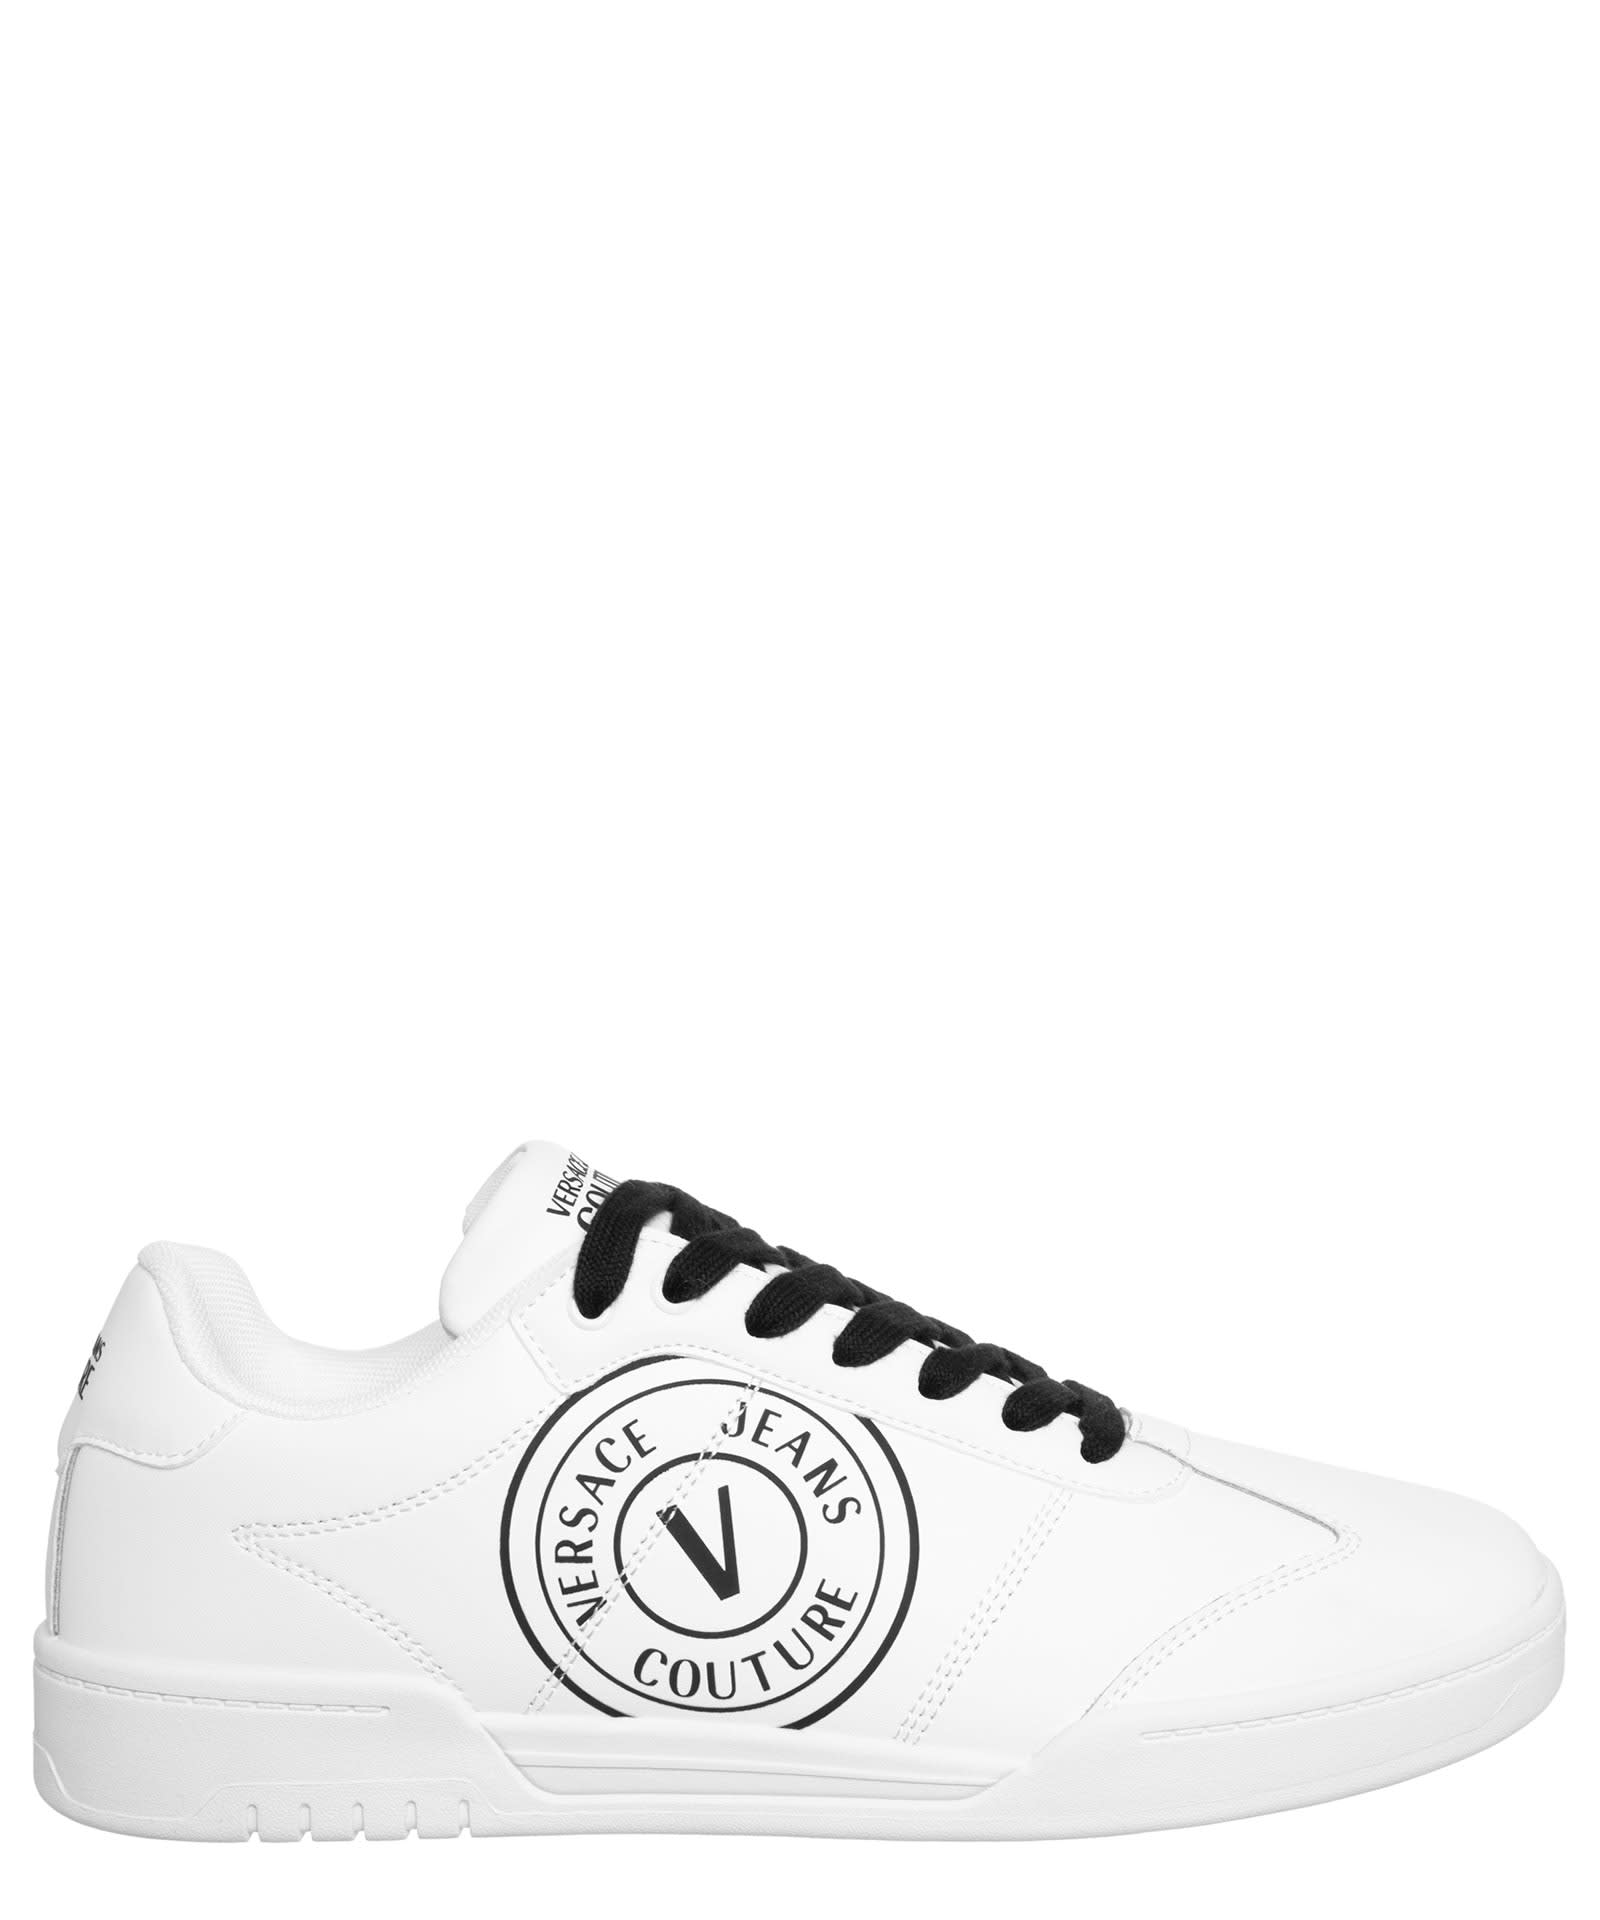 VERSACE JEANS COUTURE BROOKLYN V-EMBLEM LEATHER SNEAKERS